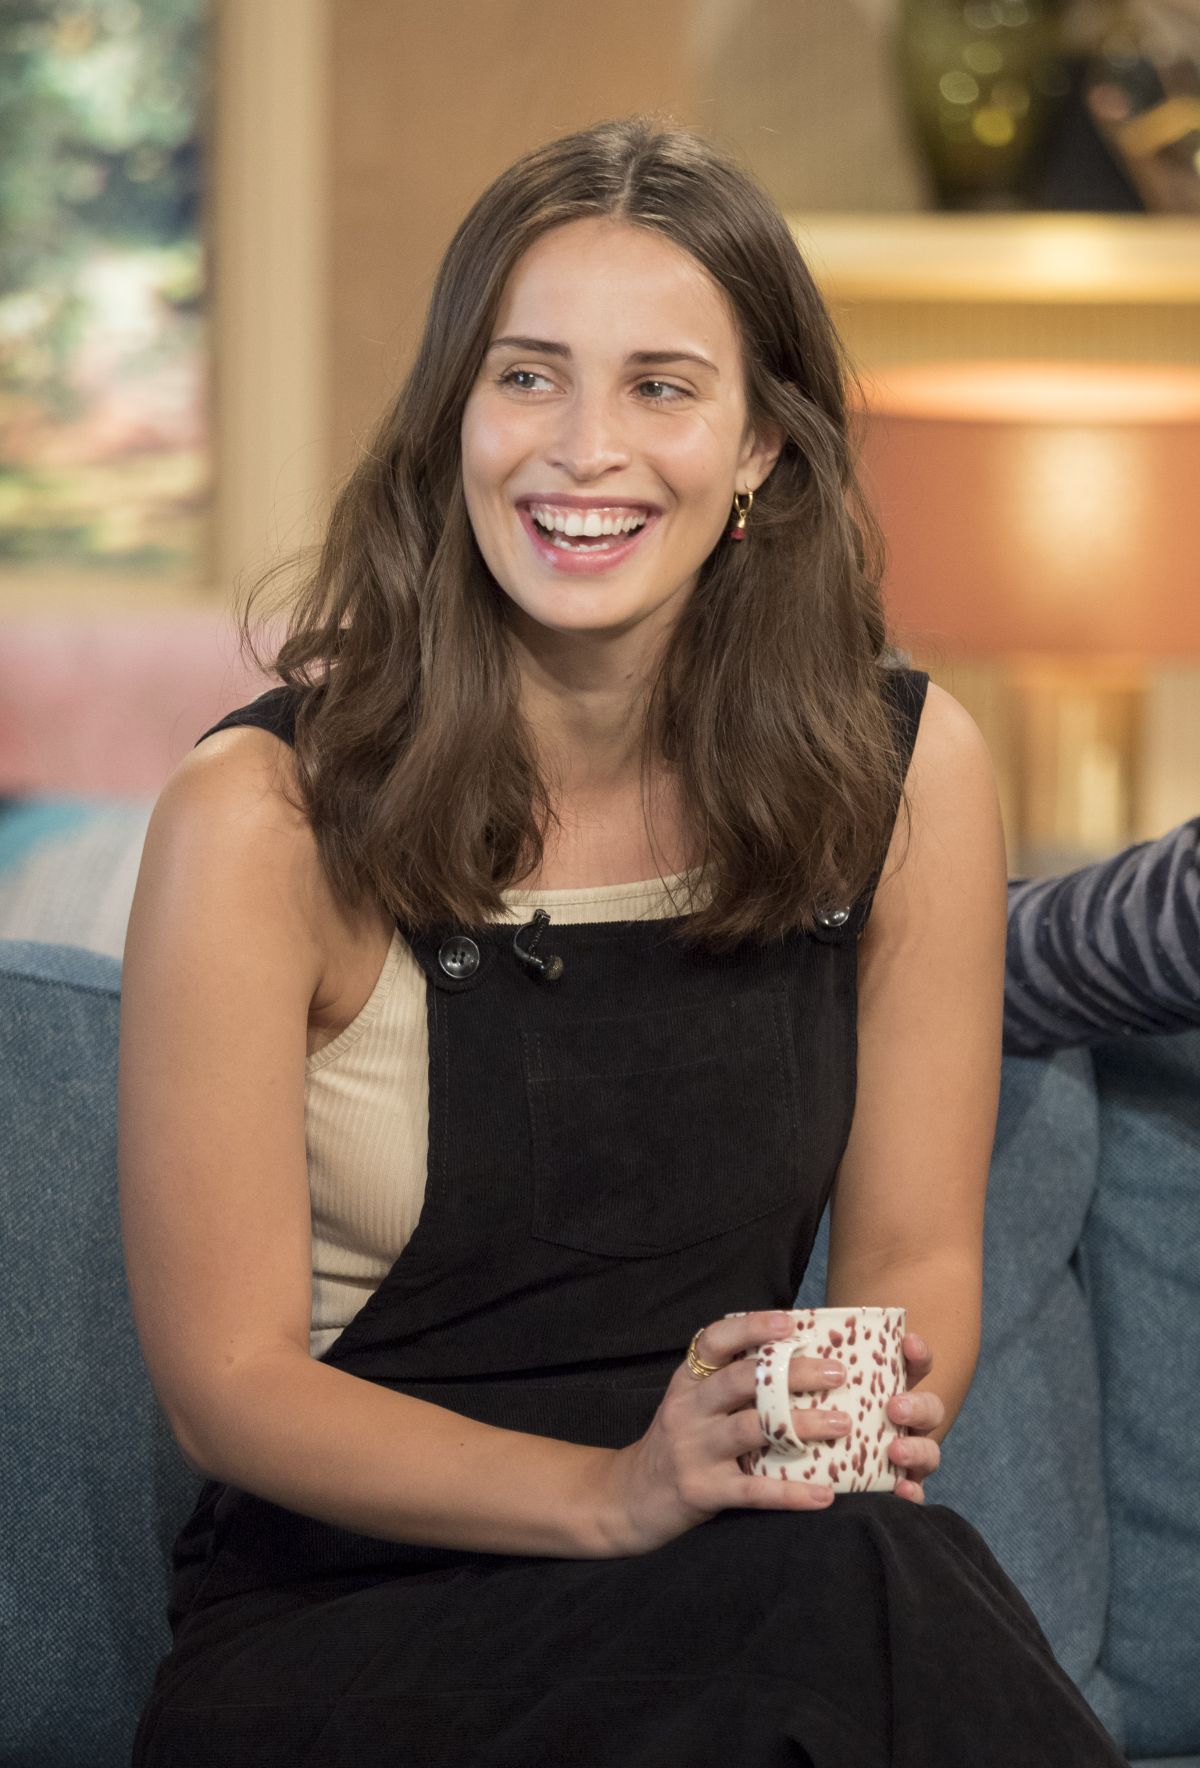 HEIDA REED at This Morning TV Show in London 09/15/2016.